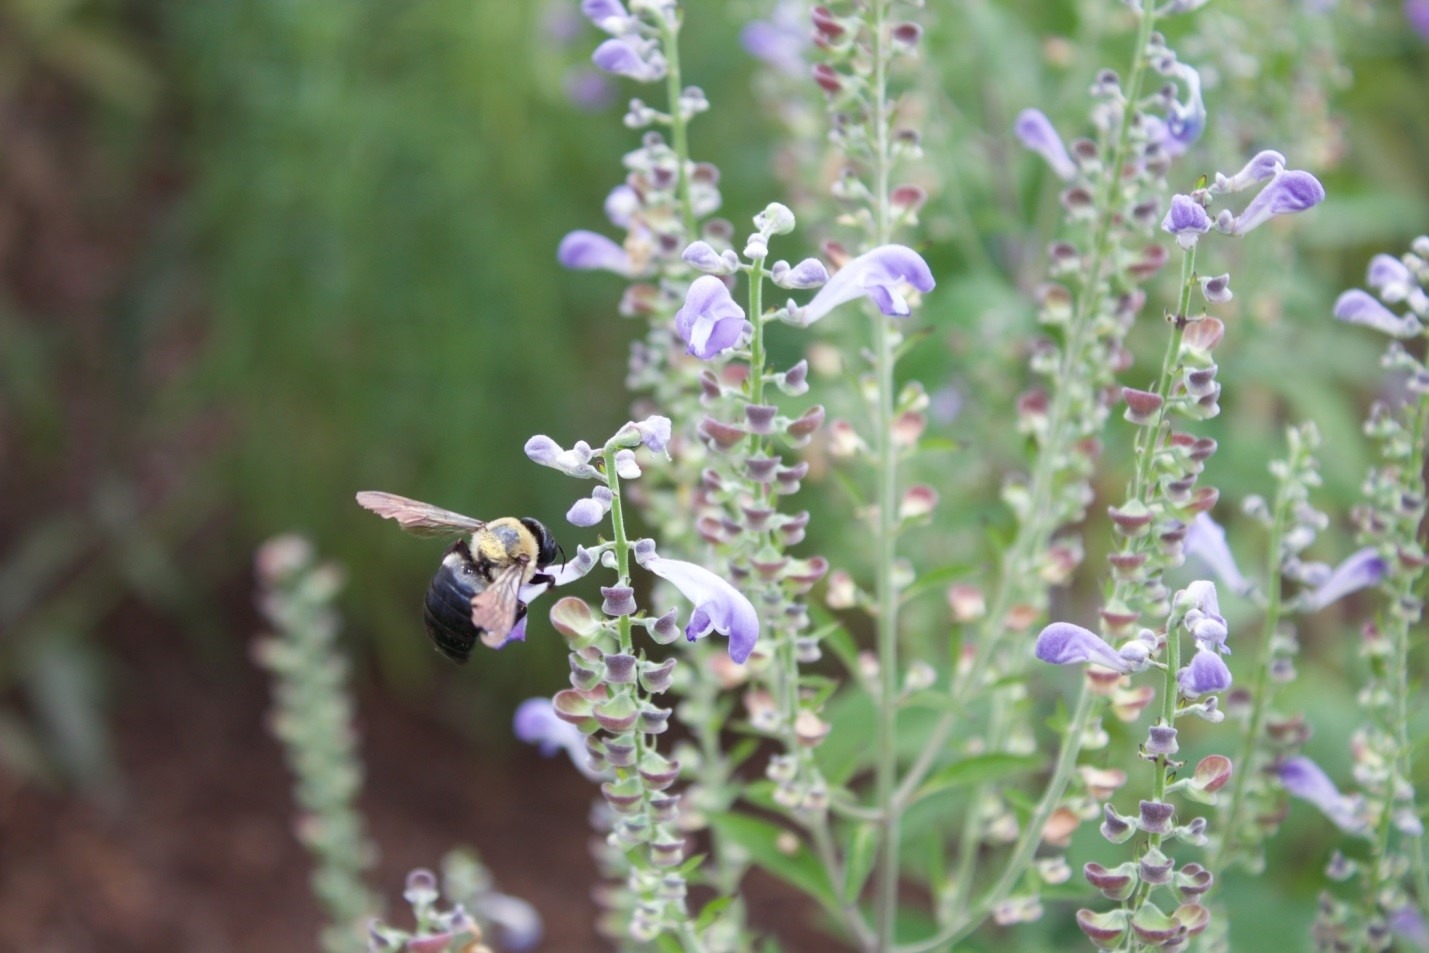 A carpenter bee flying near lavender-colored skullcap flowers. Companion planting with skullcap near vegetables attracts beneficial insects.